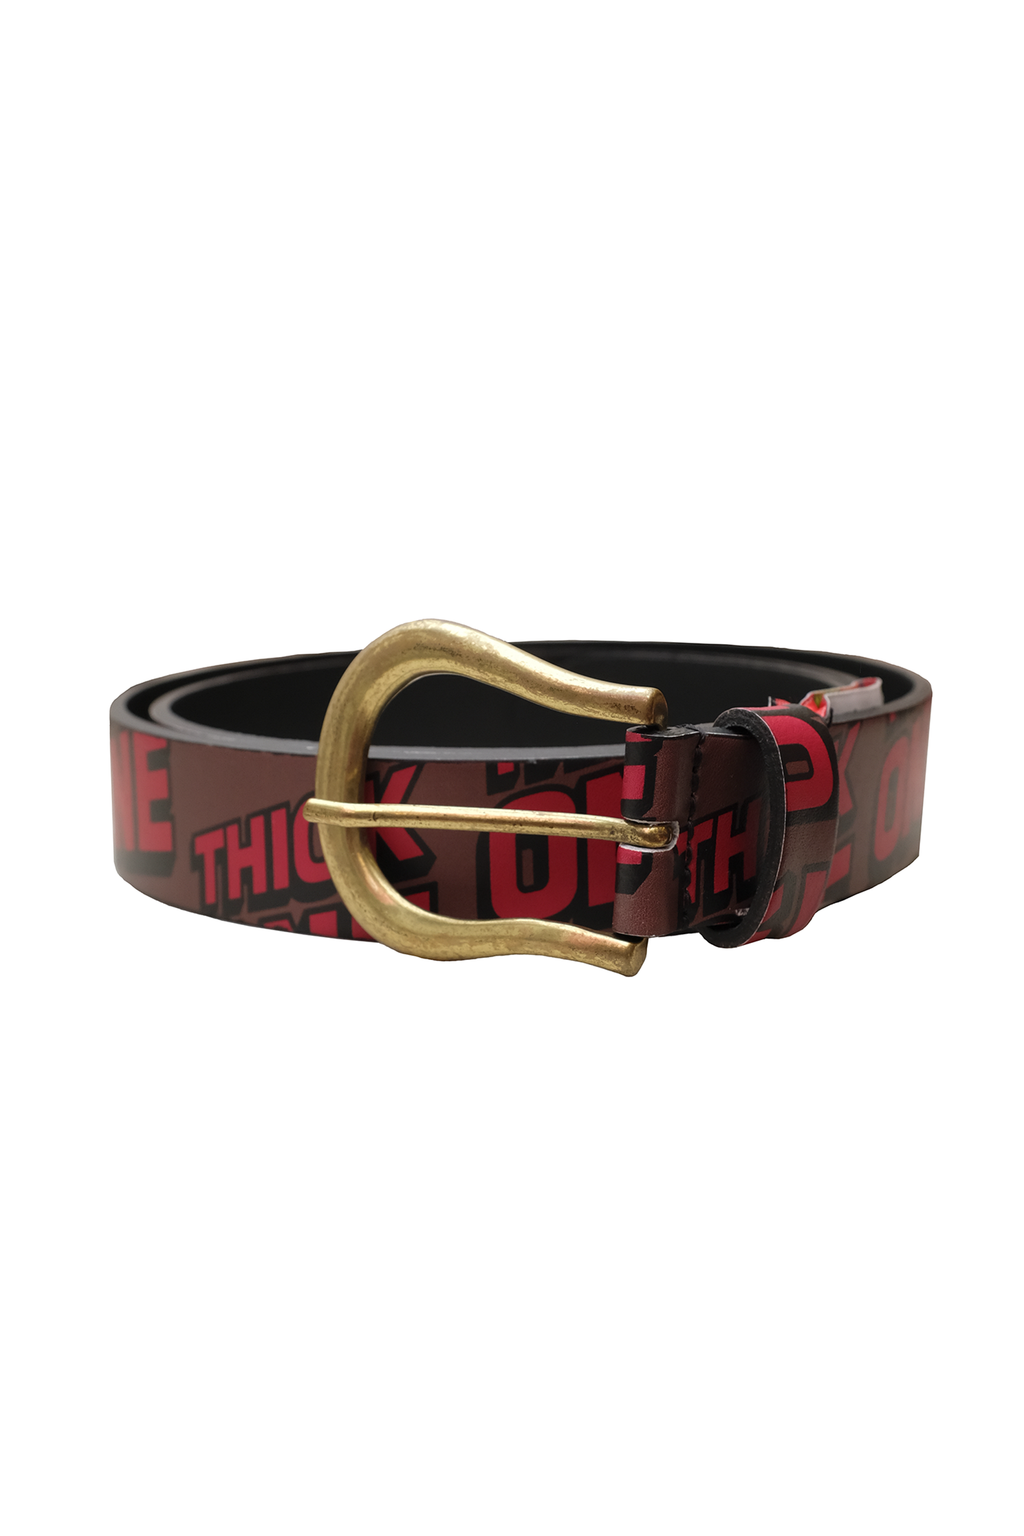 UNISEX THICK ONE ALLOVER PRINT BELT LEATHER